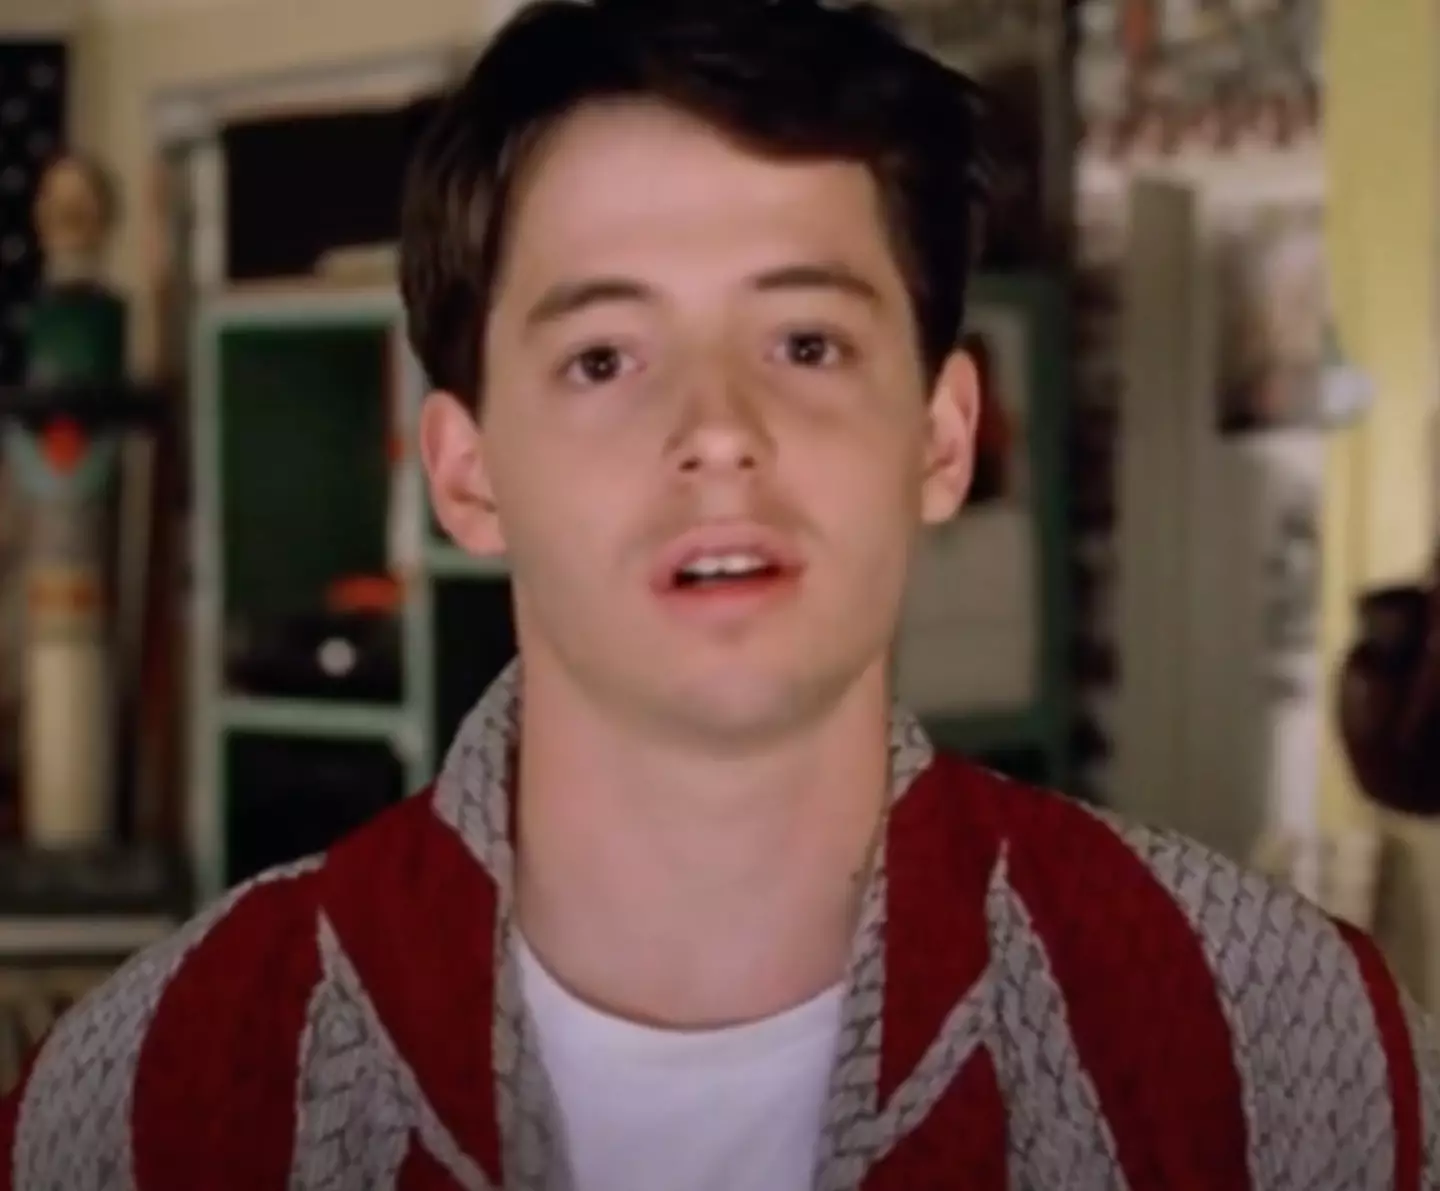 Matthew Broderick struggled after heights of Ferris Bueller's Day Off.